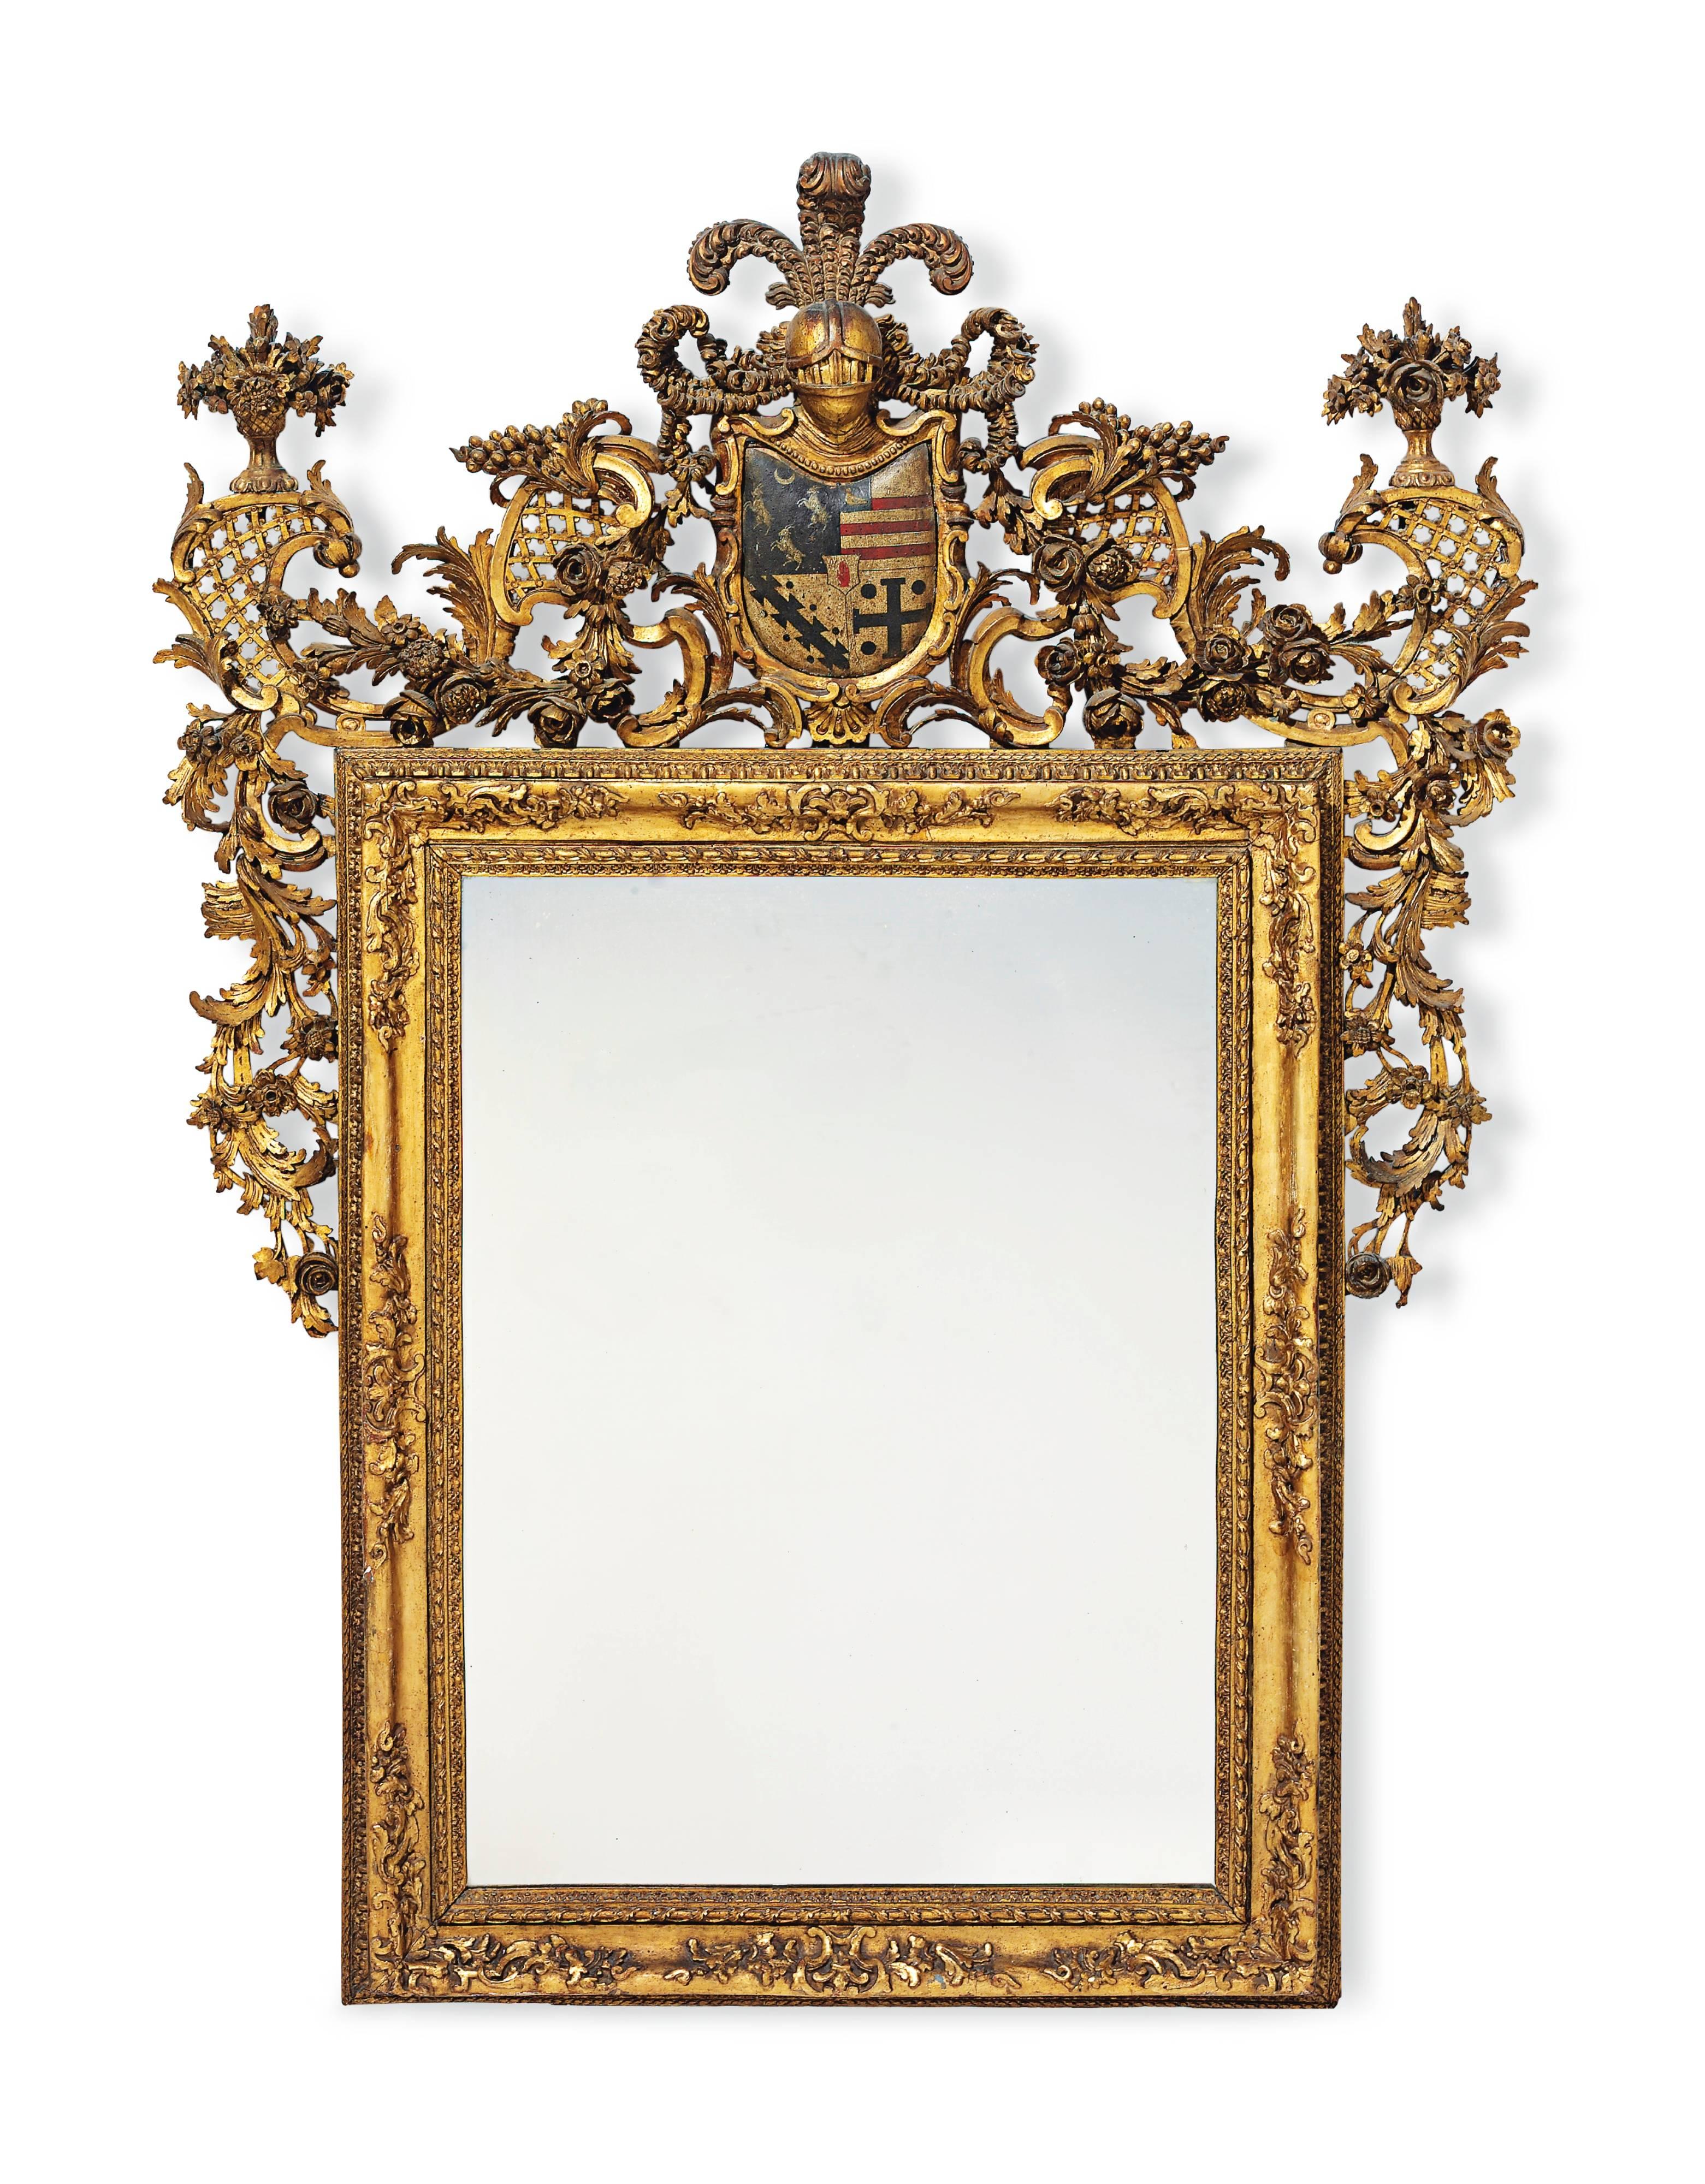 Each with a rectangular plate within a stiff leaf, entwined vine and fleur de lis carved surround, the cresting centred by an armorial shield for the Thorold baronets surmounted by a plummed helmet, flanked by trellis with flower-filled vase finials